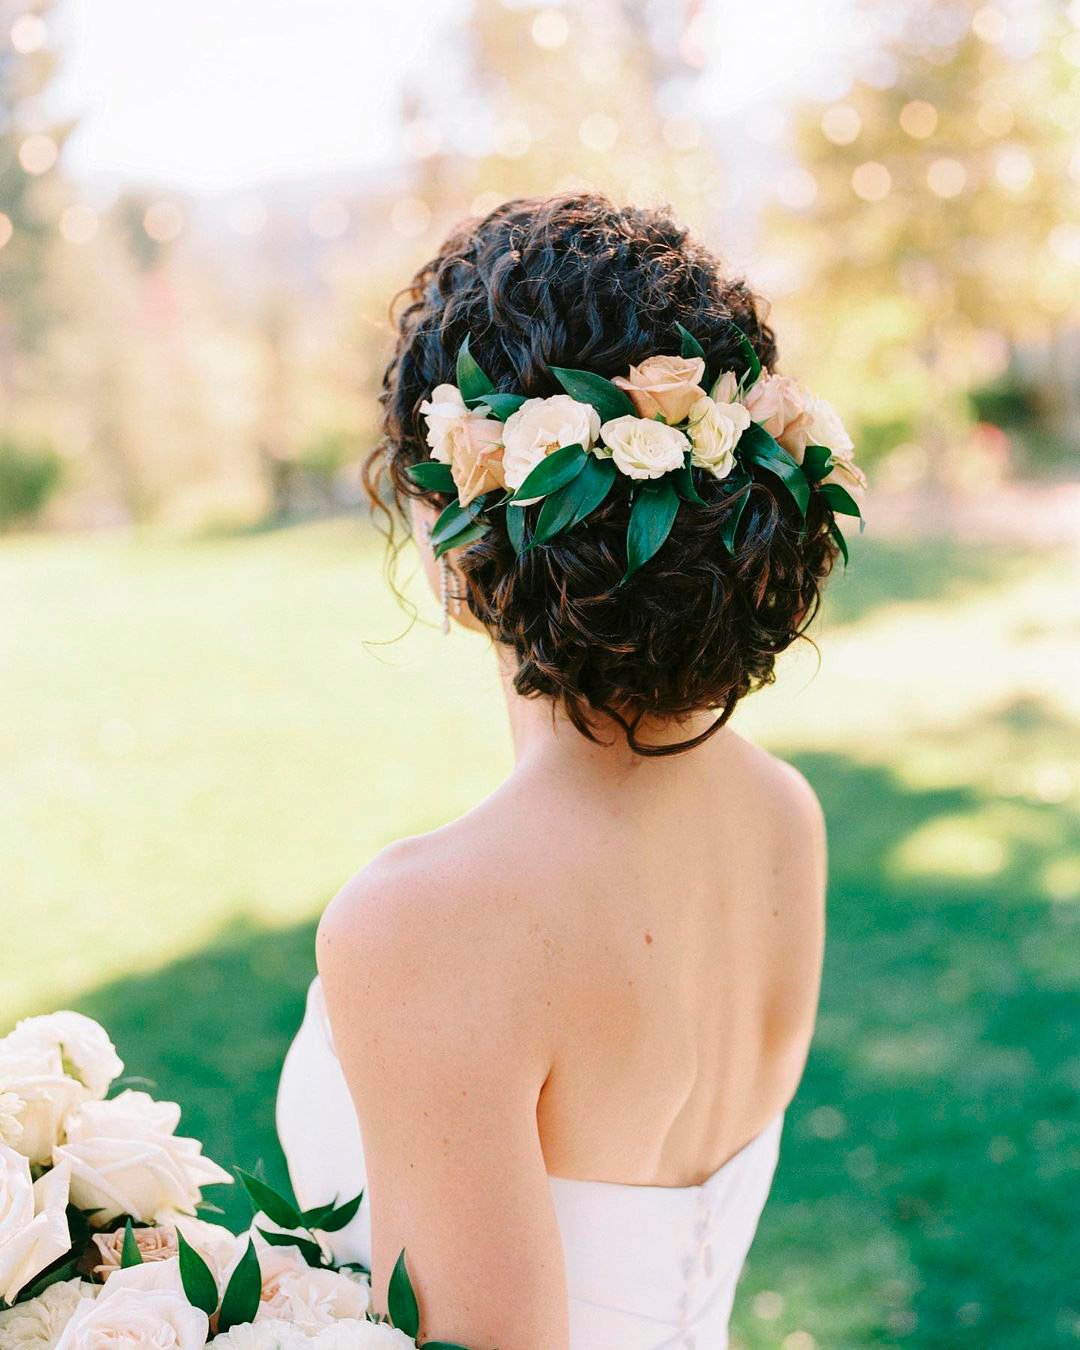 how to choose wedding hairstyle bride flowers